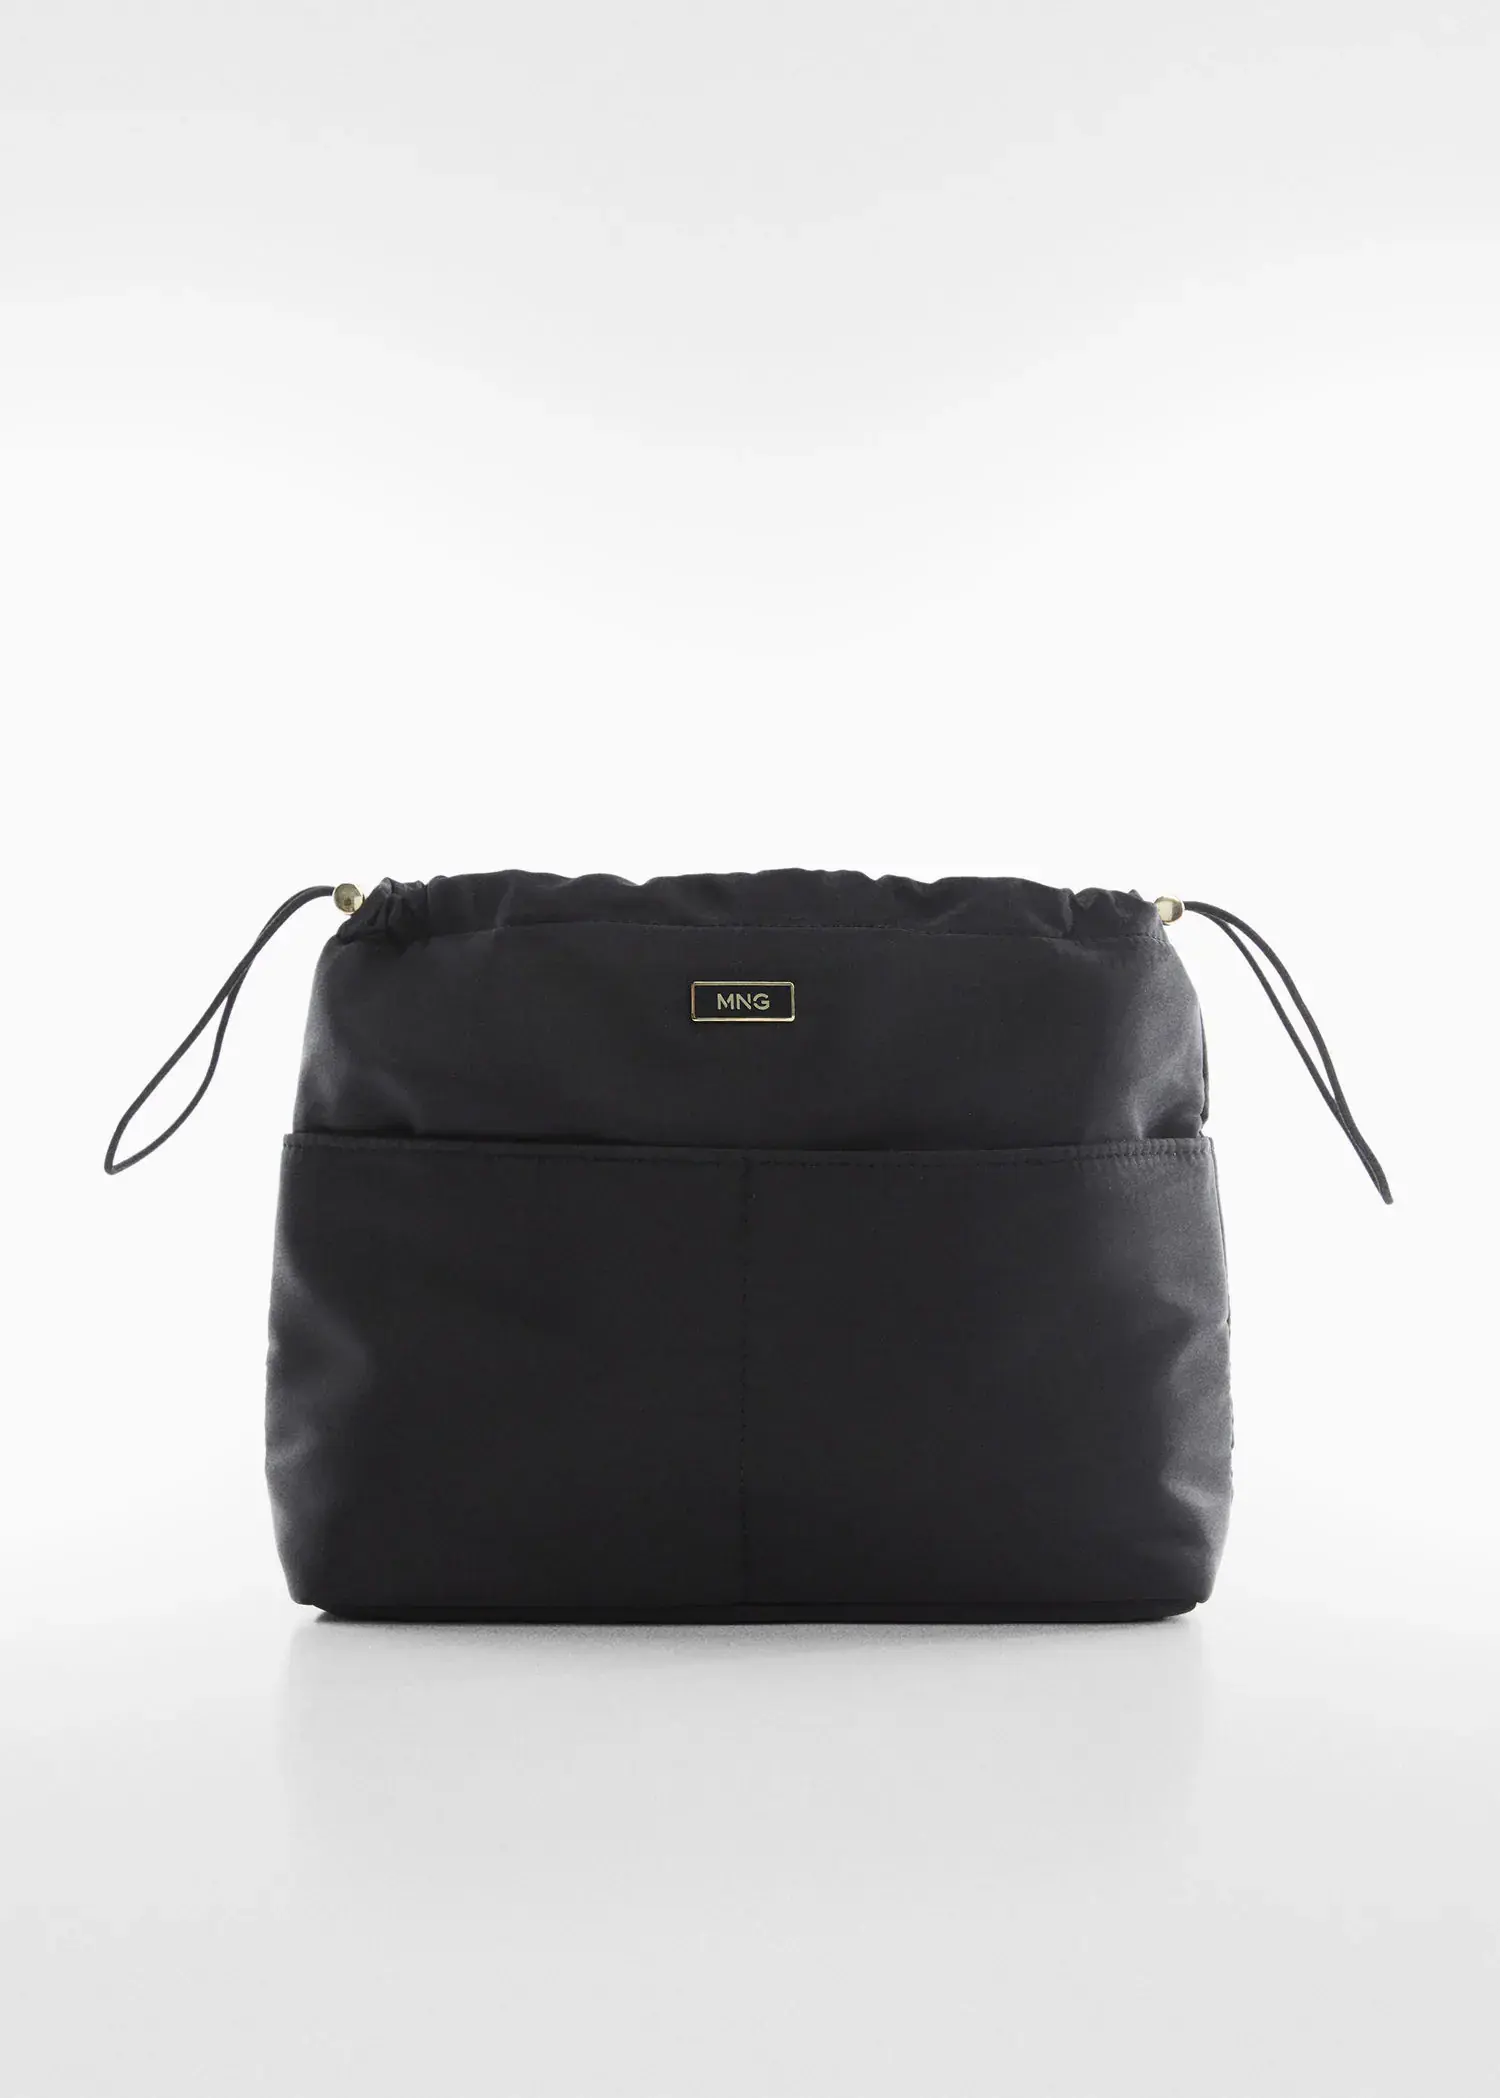 Mango Leather bowling bag. a black bag sitting on top of a white table. 